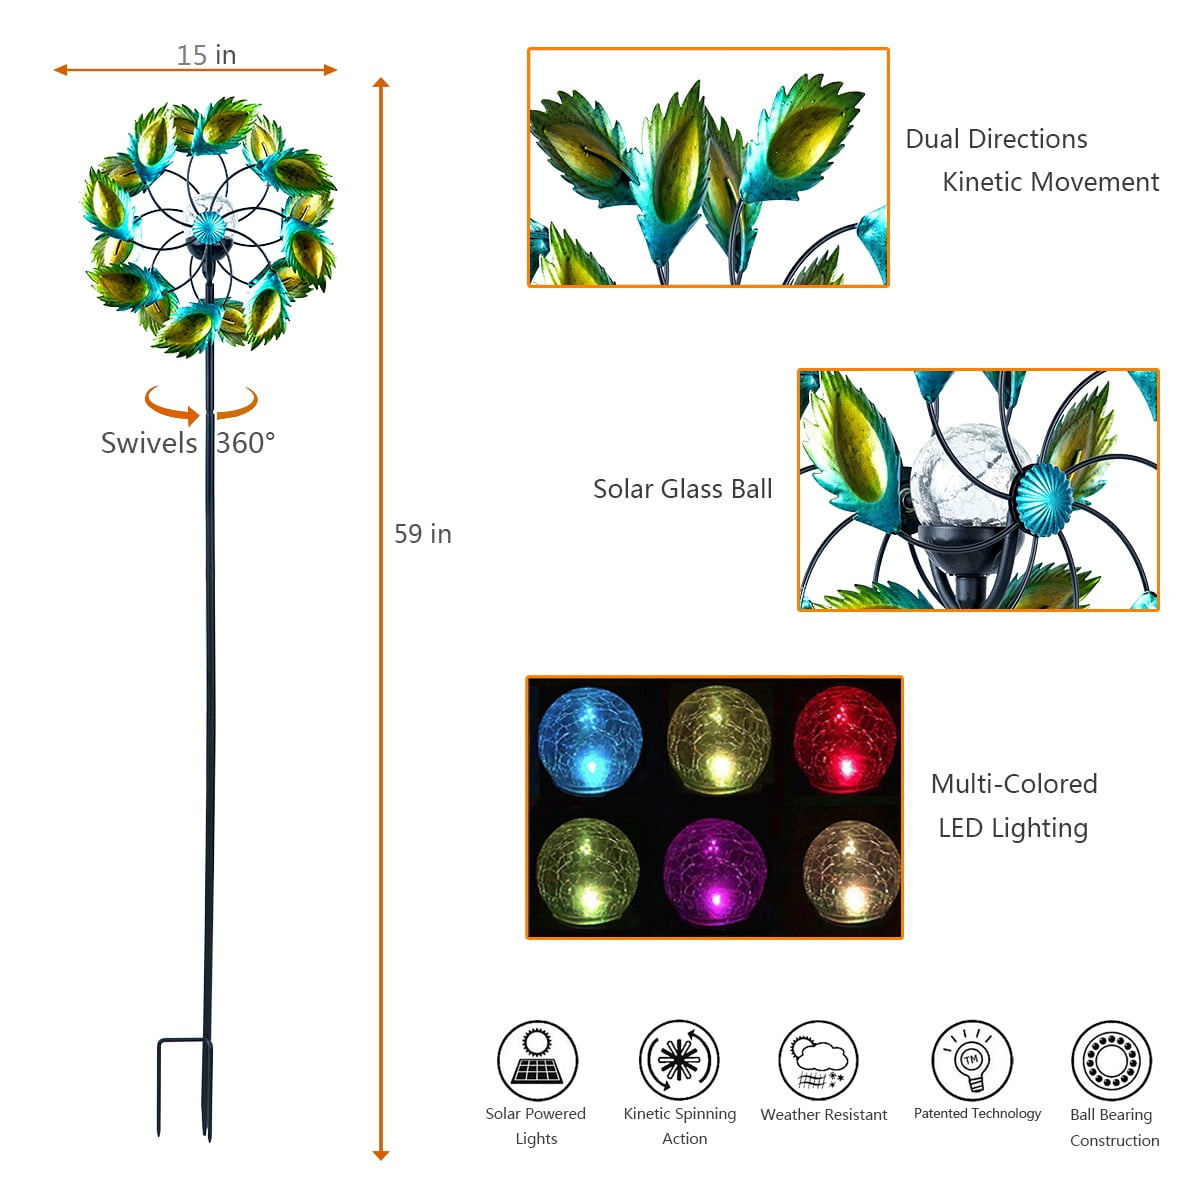 hourflik Solar Wind Spinner 3D Kinetic Wind Spinners Outdoor Metal Gardening Decorations with Multi-Color LED Lighting by Solar Powered Glass Ball with Lawn Ornament Wind Mills 